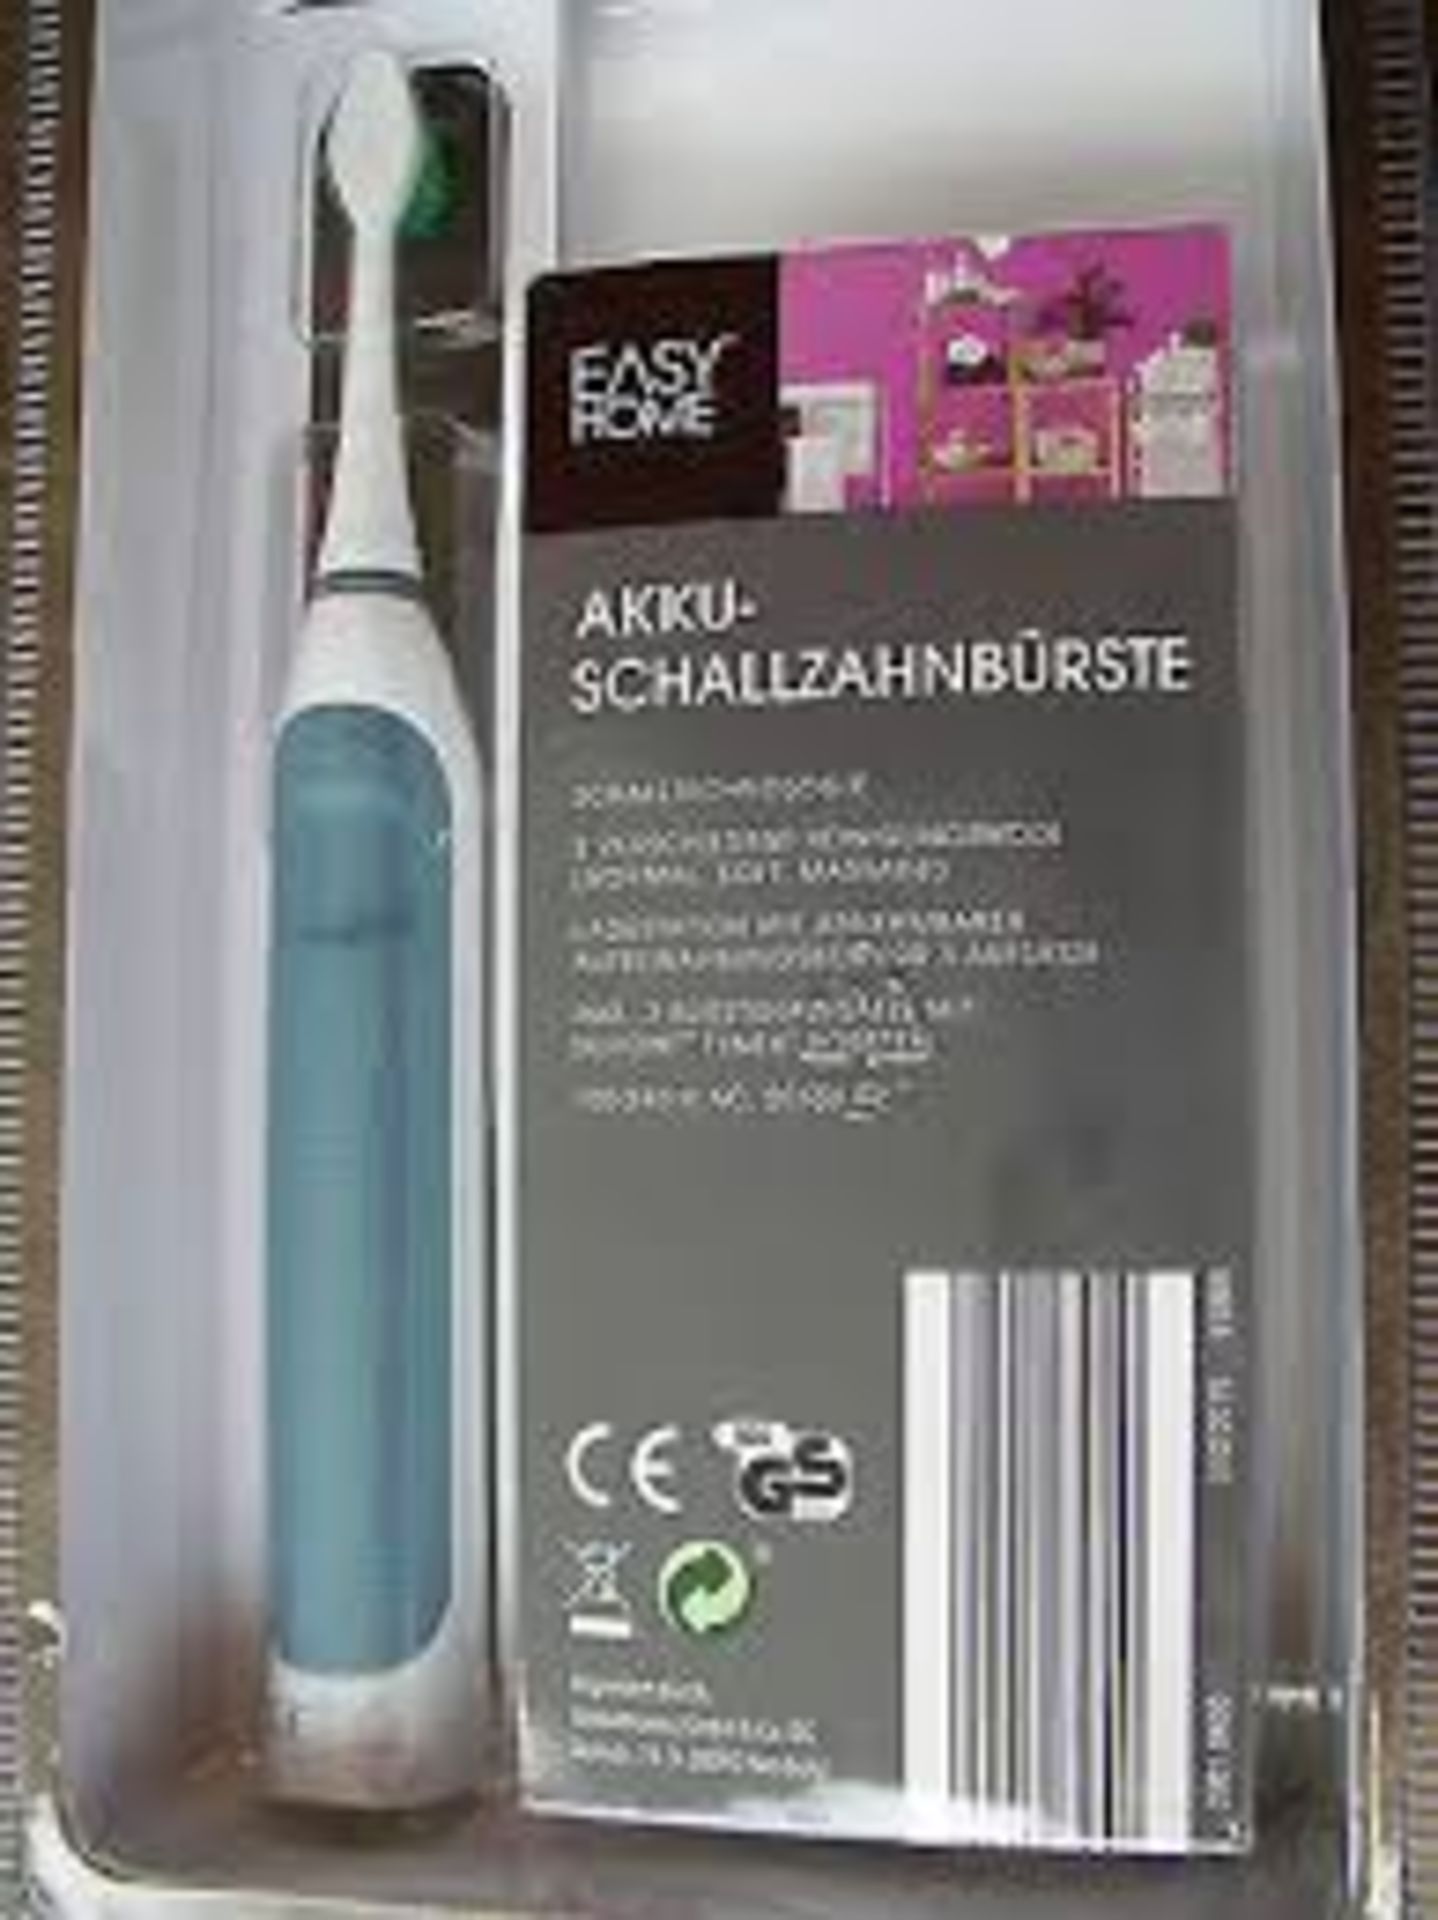 V Brand New Sonic Electric Toothbrush-3 Different Cleaning Modes-Charge Control Display-Timer - Image 2 of 2